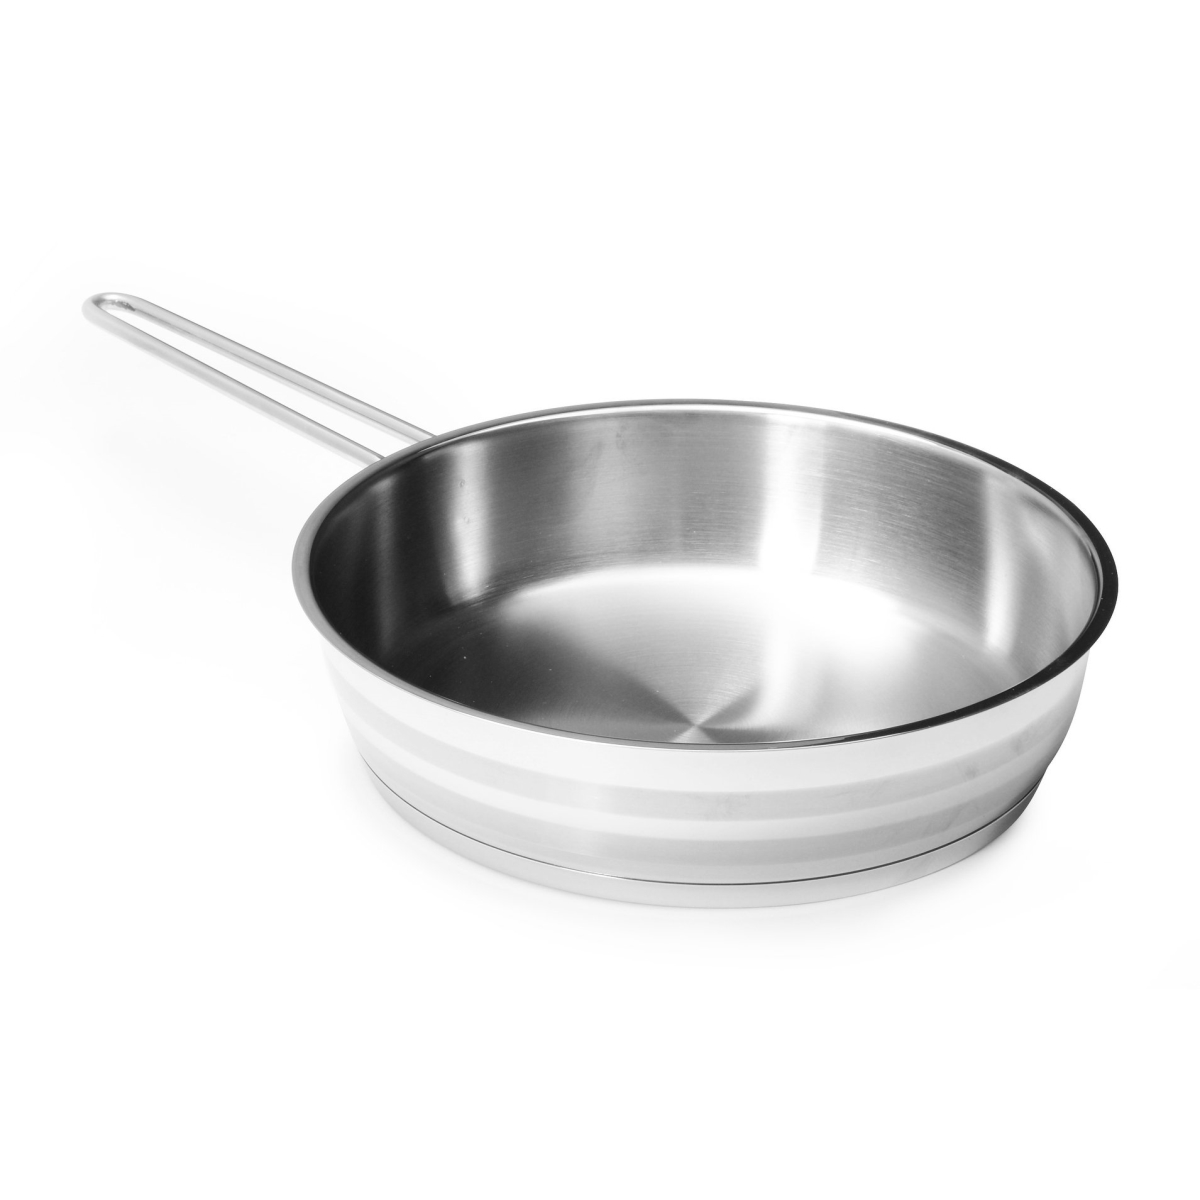 Korkmaz A1697 8 In. Classic 18 By 10 Stainless Steel Deep Frying Stir Fry Pan